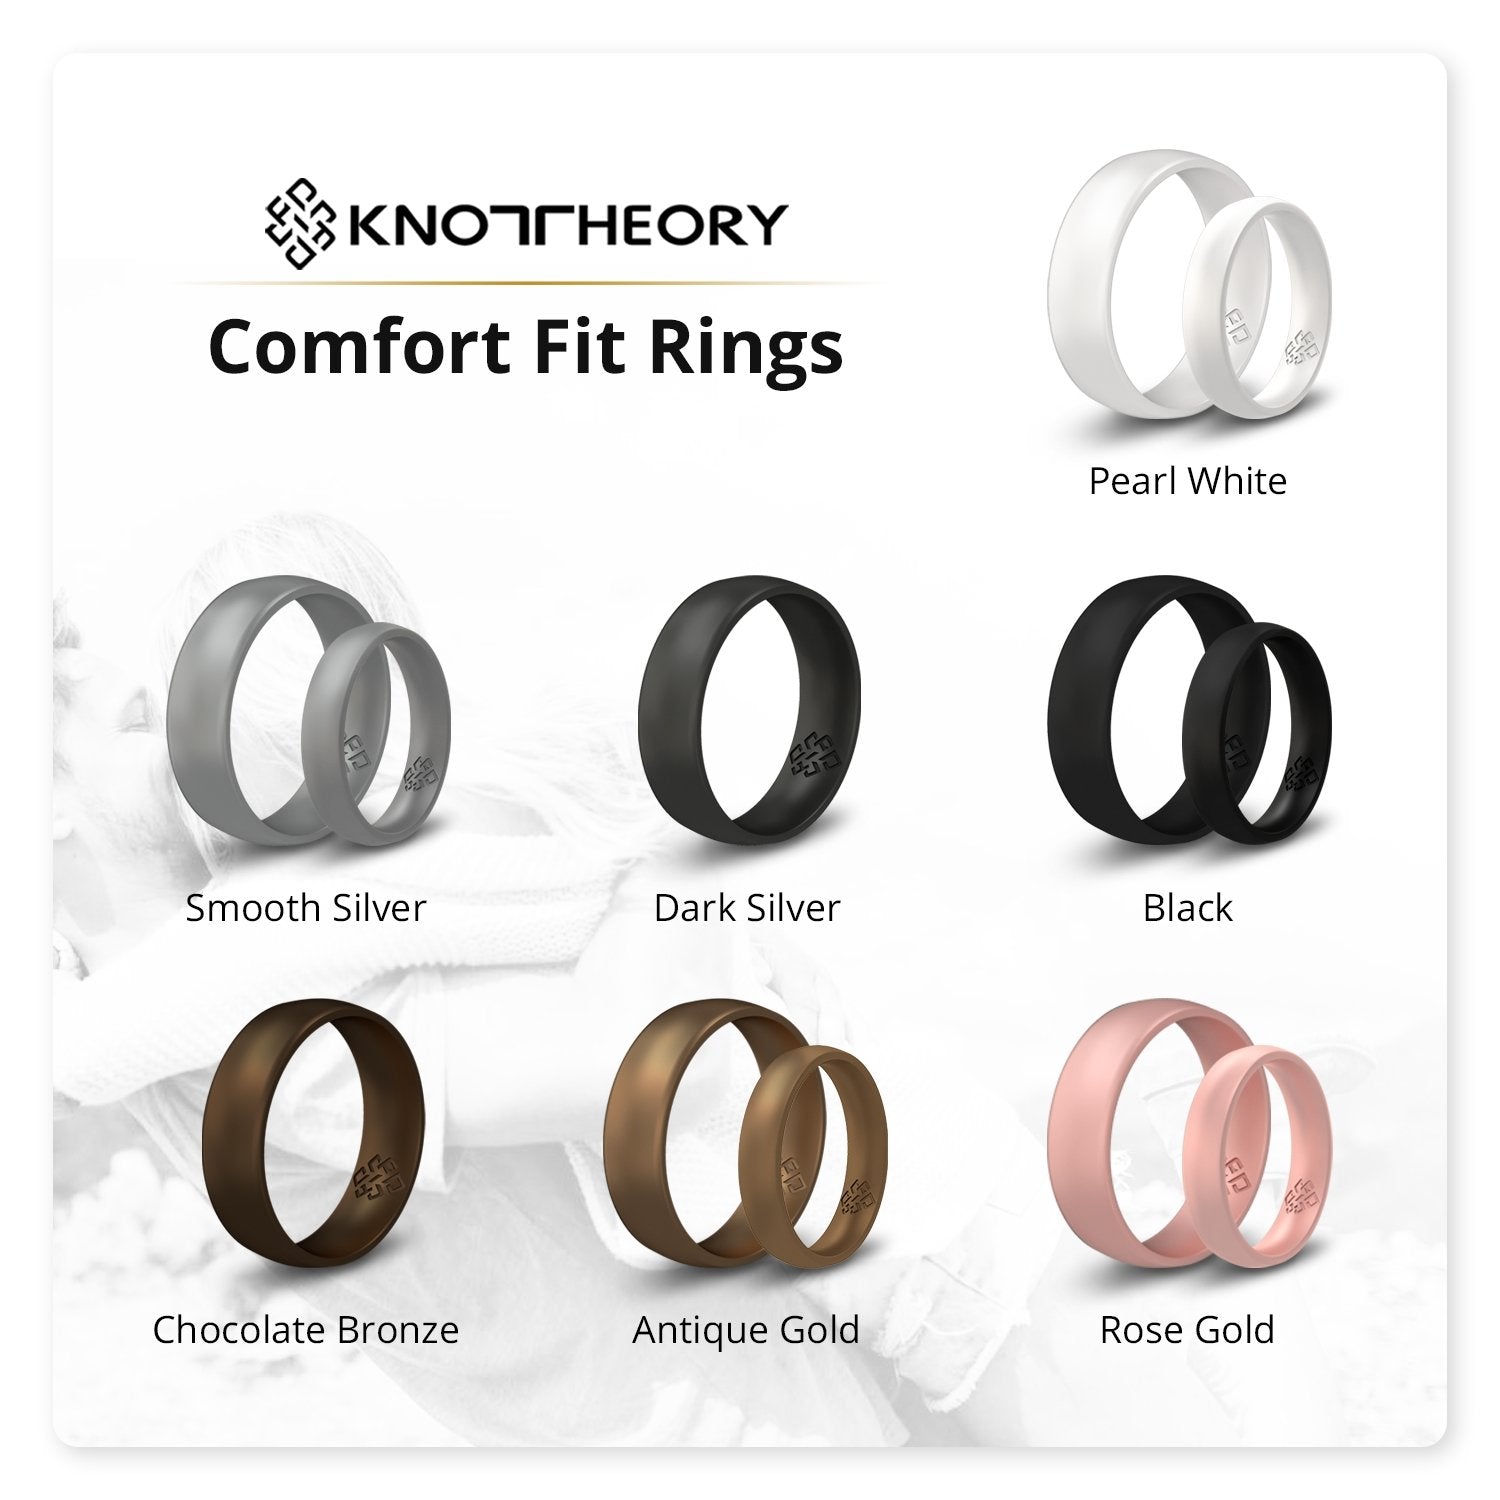 Smooth Black Breathable Silicone Ring Band for Men and Women - Knot Theory